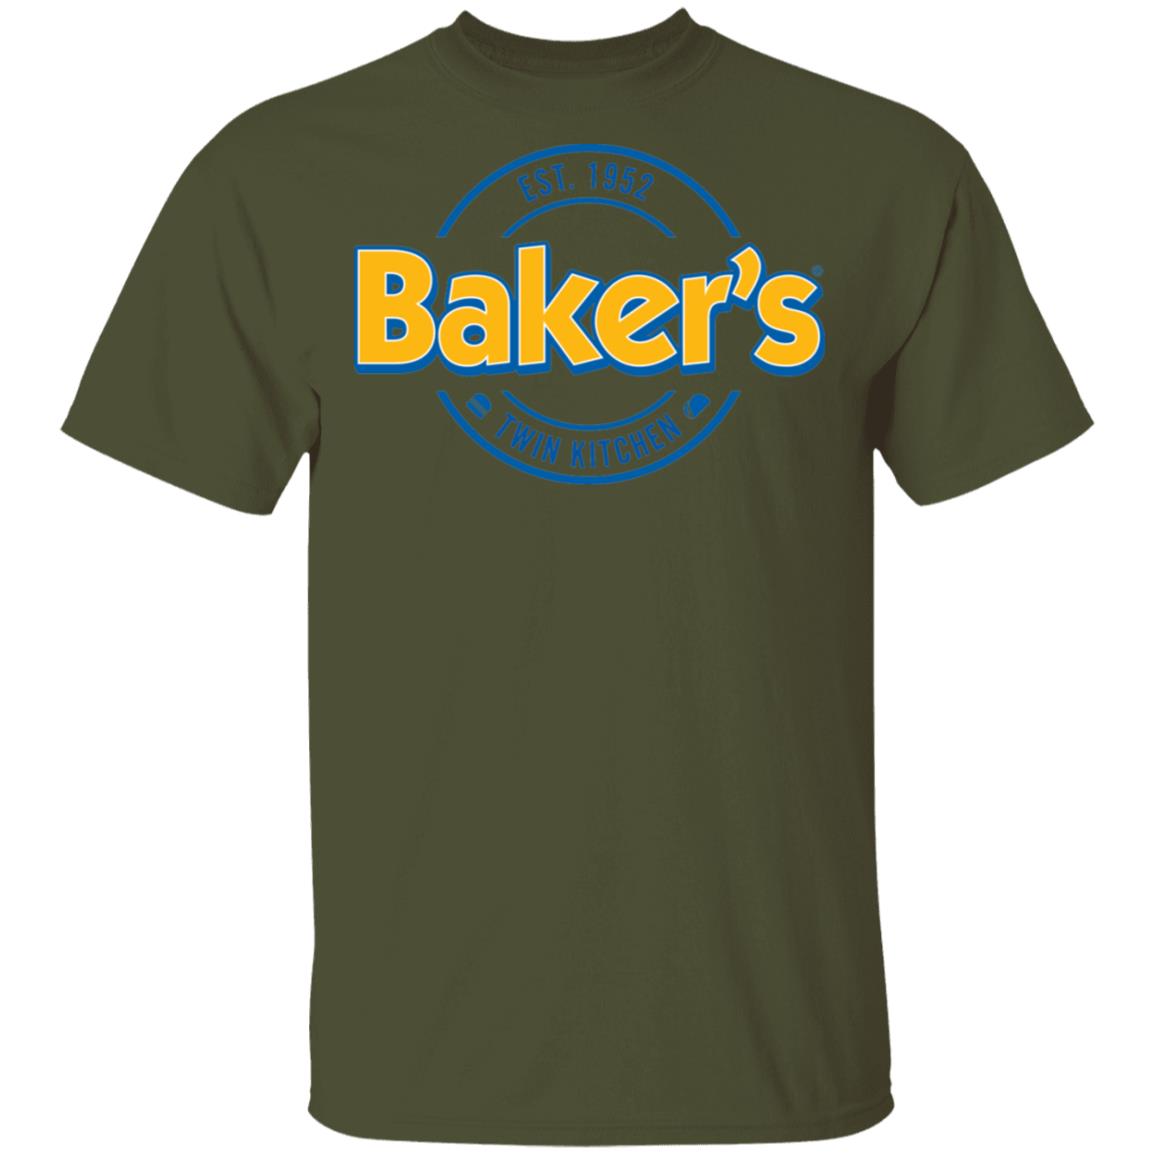 Bakers6